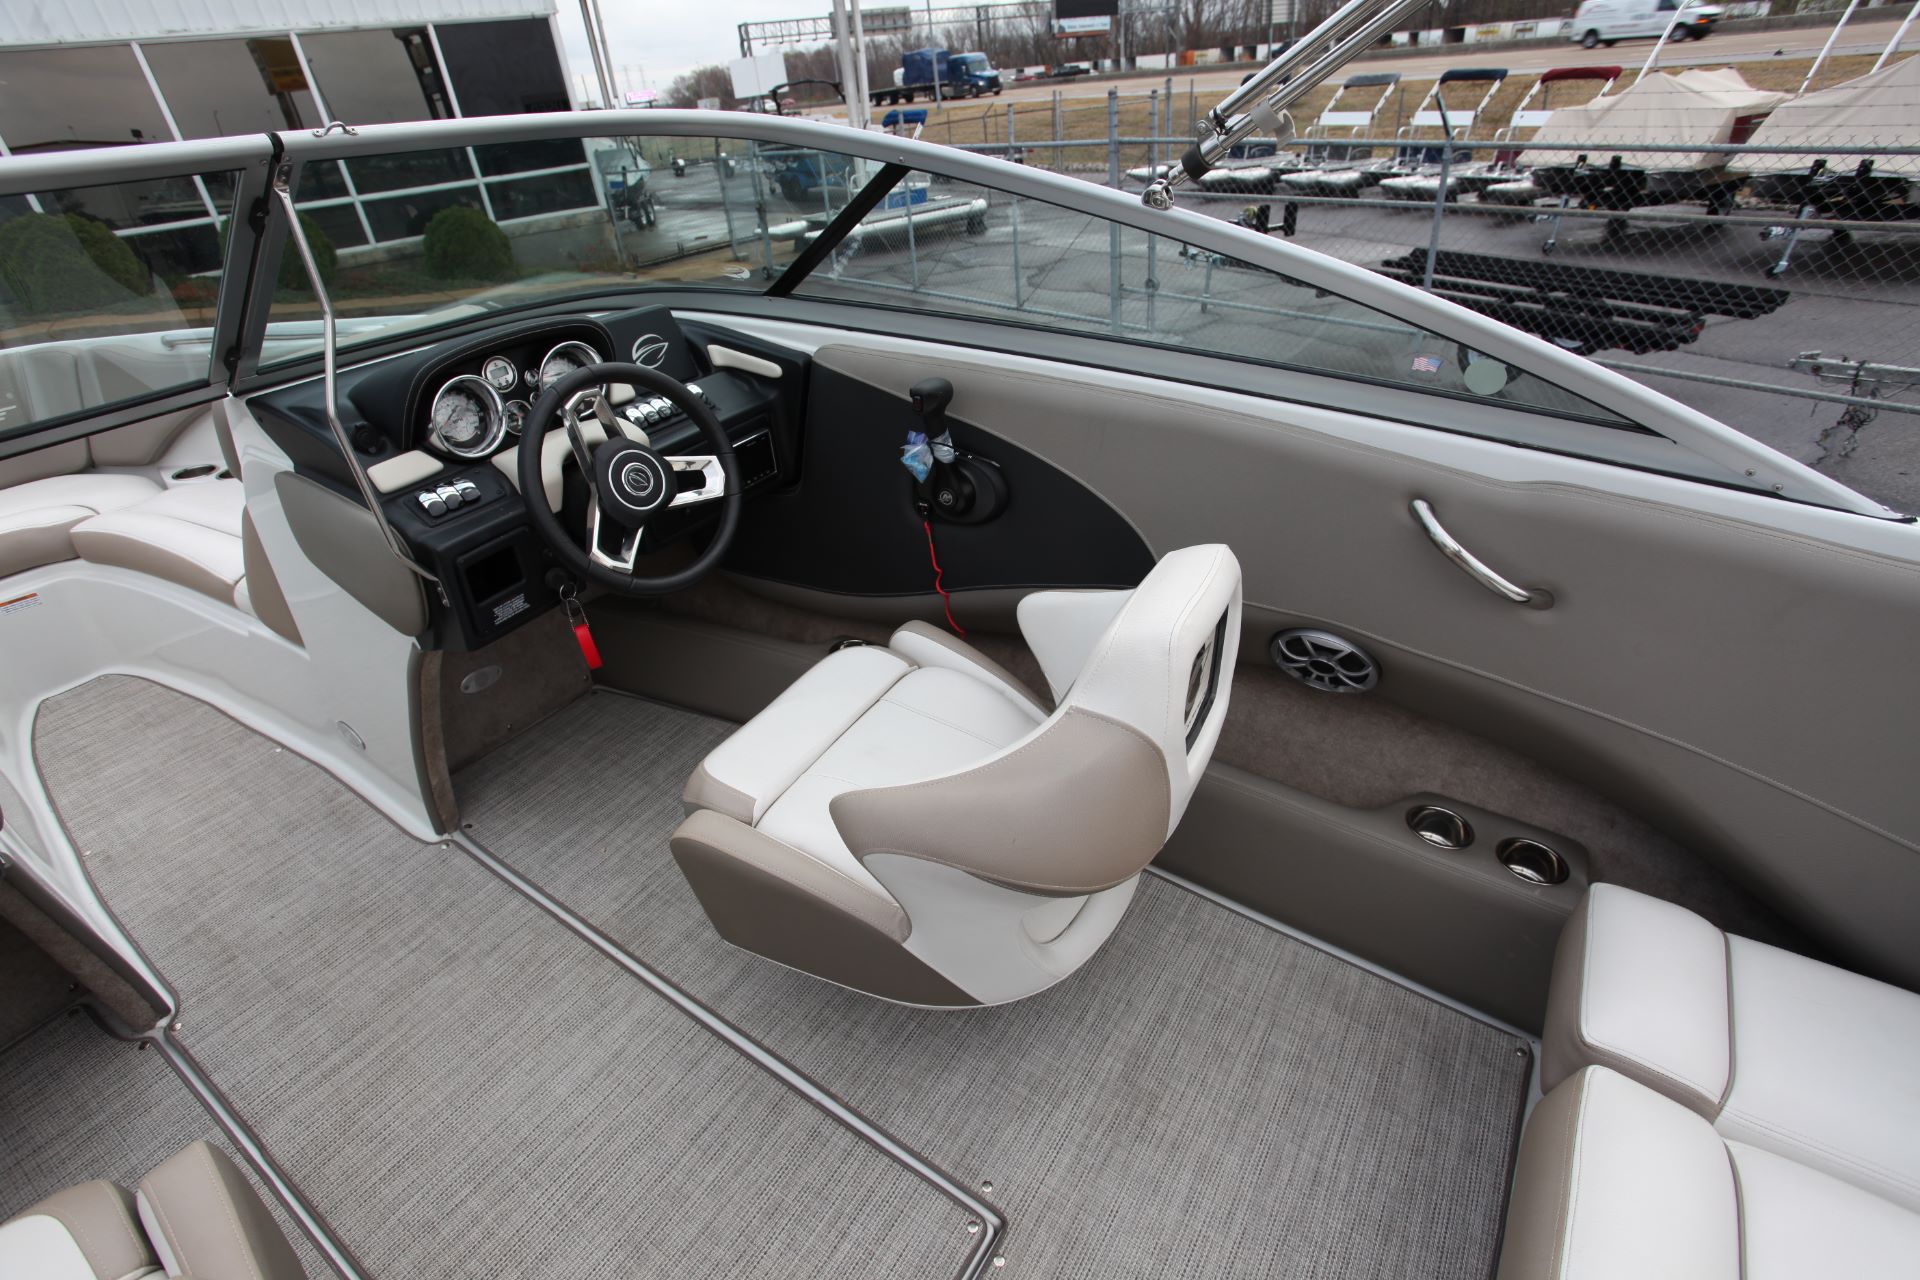 2019 Crownline 215 SS in Memphis, Tennessee - Photo 18